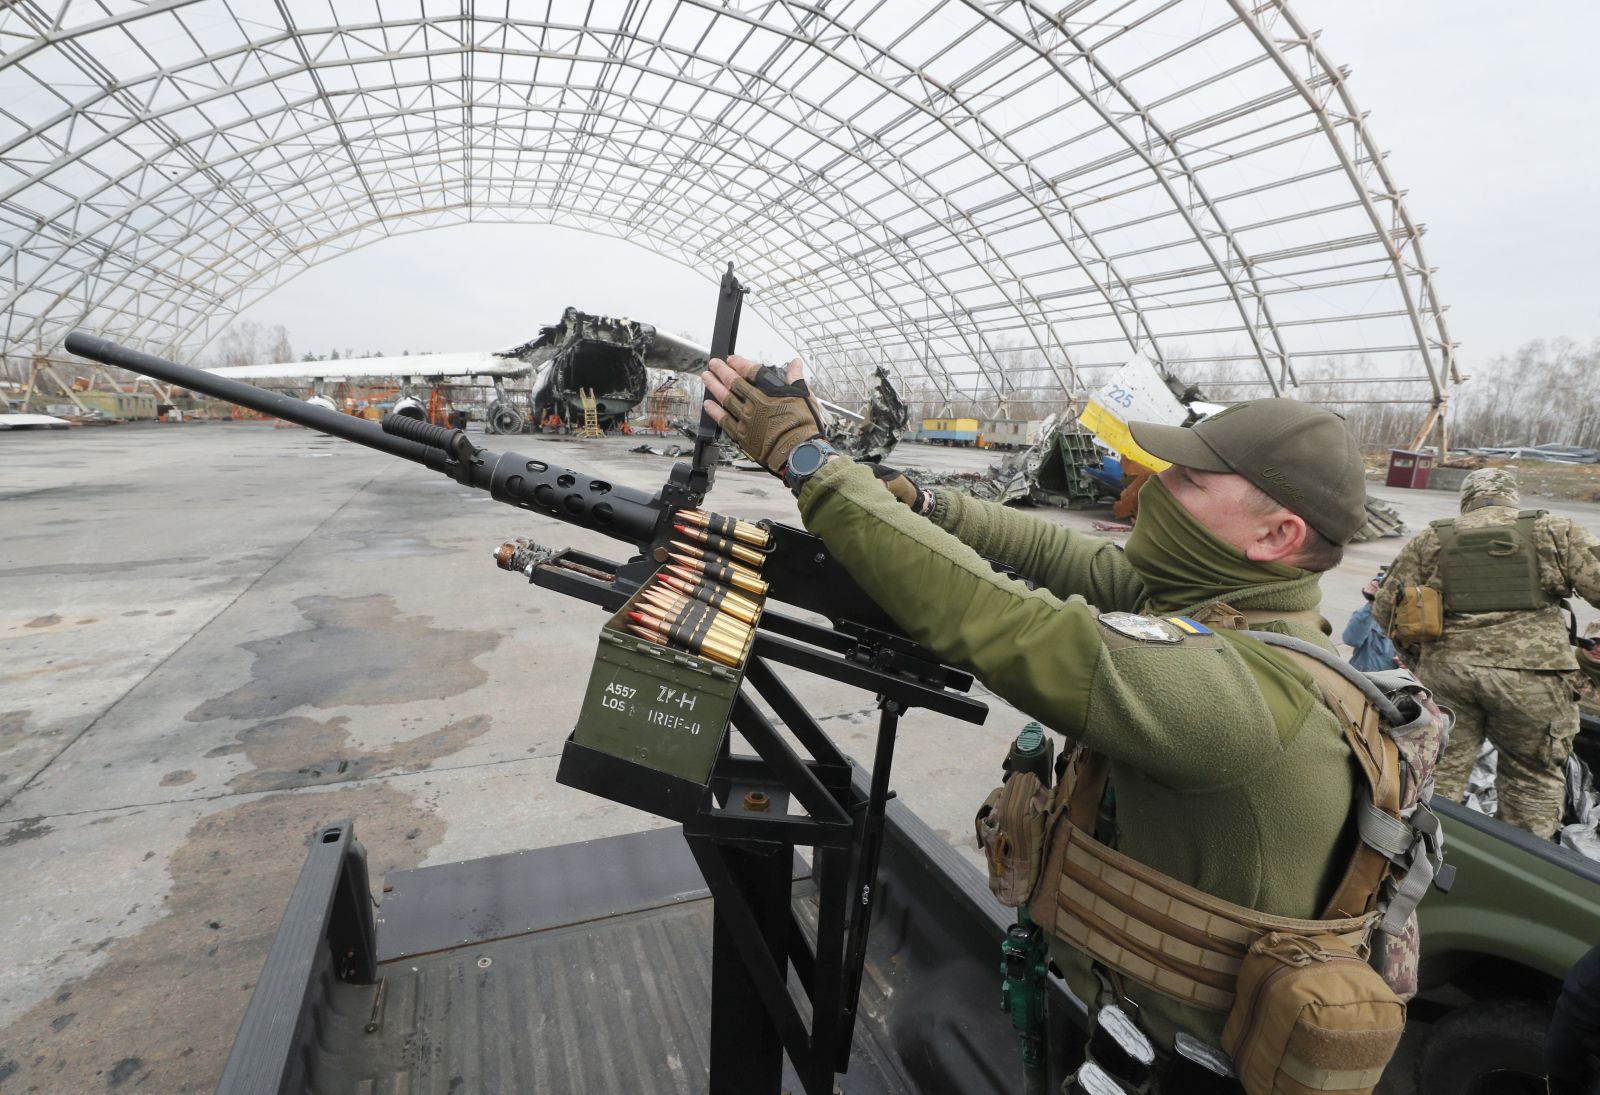 epa10553623 A Ukrainian serviceman handles a machine gun during the handing over of ten pick-up trucks to mobile anti-drone units near the largest Ukrainian cargo aircraft Antonov An-225 Mriya 'Dream' that was destroyed during the Russian attacks on Hostomel Airfield not far from Kyiv, Ukraine, 01 April 2023 amid the Russian invasion. Mobile anti-drone units have the task to track and destroy enemy kamikaze drones and other low-flying aerial targets. Russian troops on 24 February 2022, entered Ukrainian territory, starting a conflict that has provoked destruction and a humanitarian crisis.  EPA/SERGEY DOLZHENKO